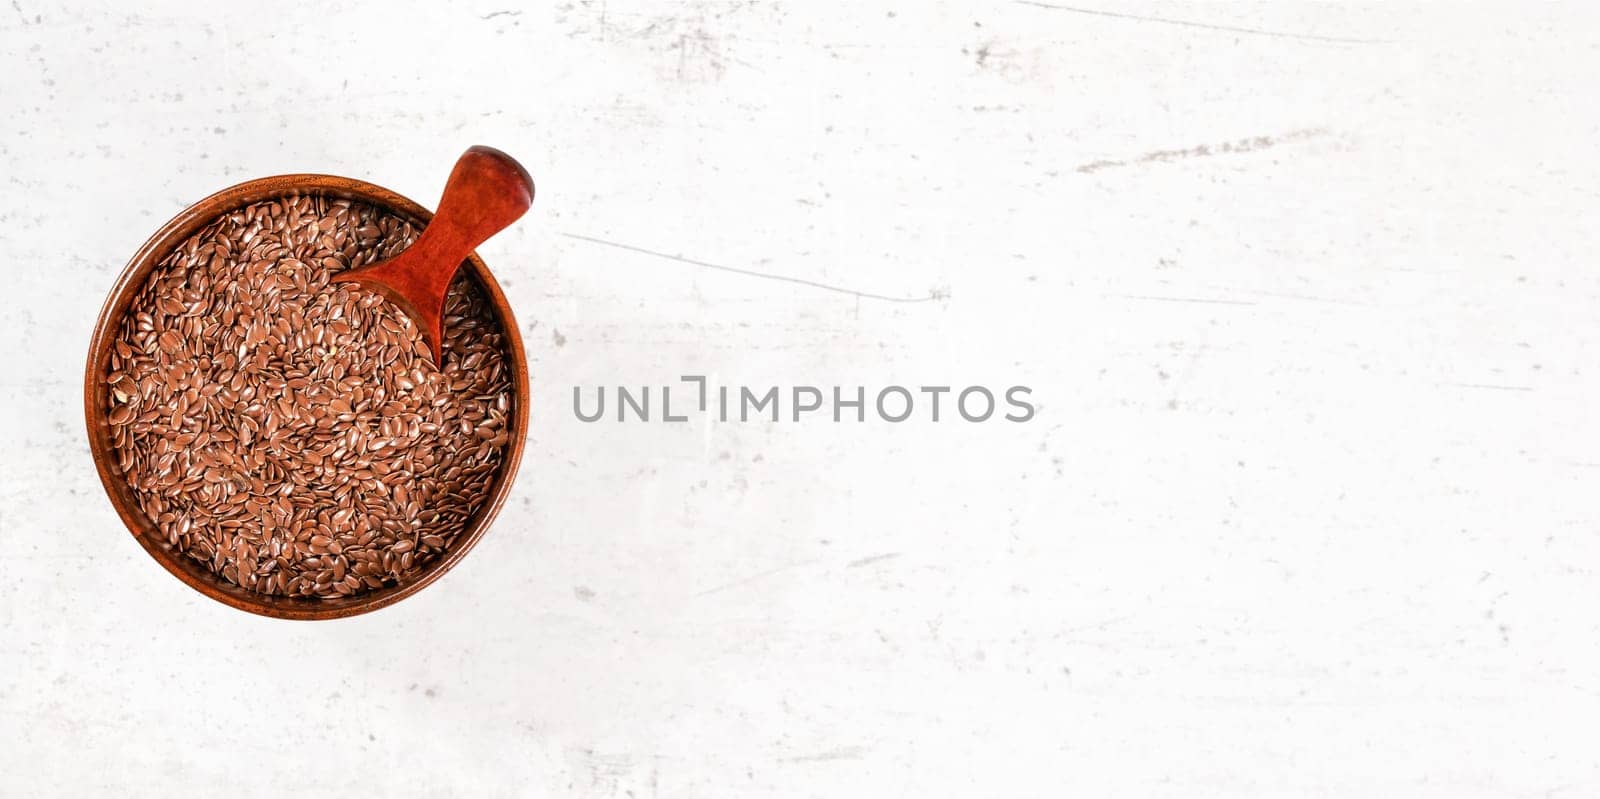 Common Flax linseed (Linum usitatissimum) seeds in small wooden bowl with scoop. View from above on white stone like board, space for text right side by Ivanko